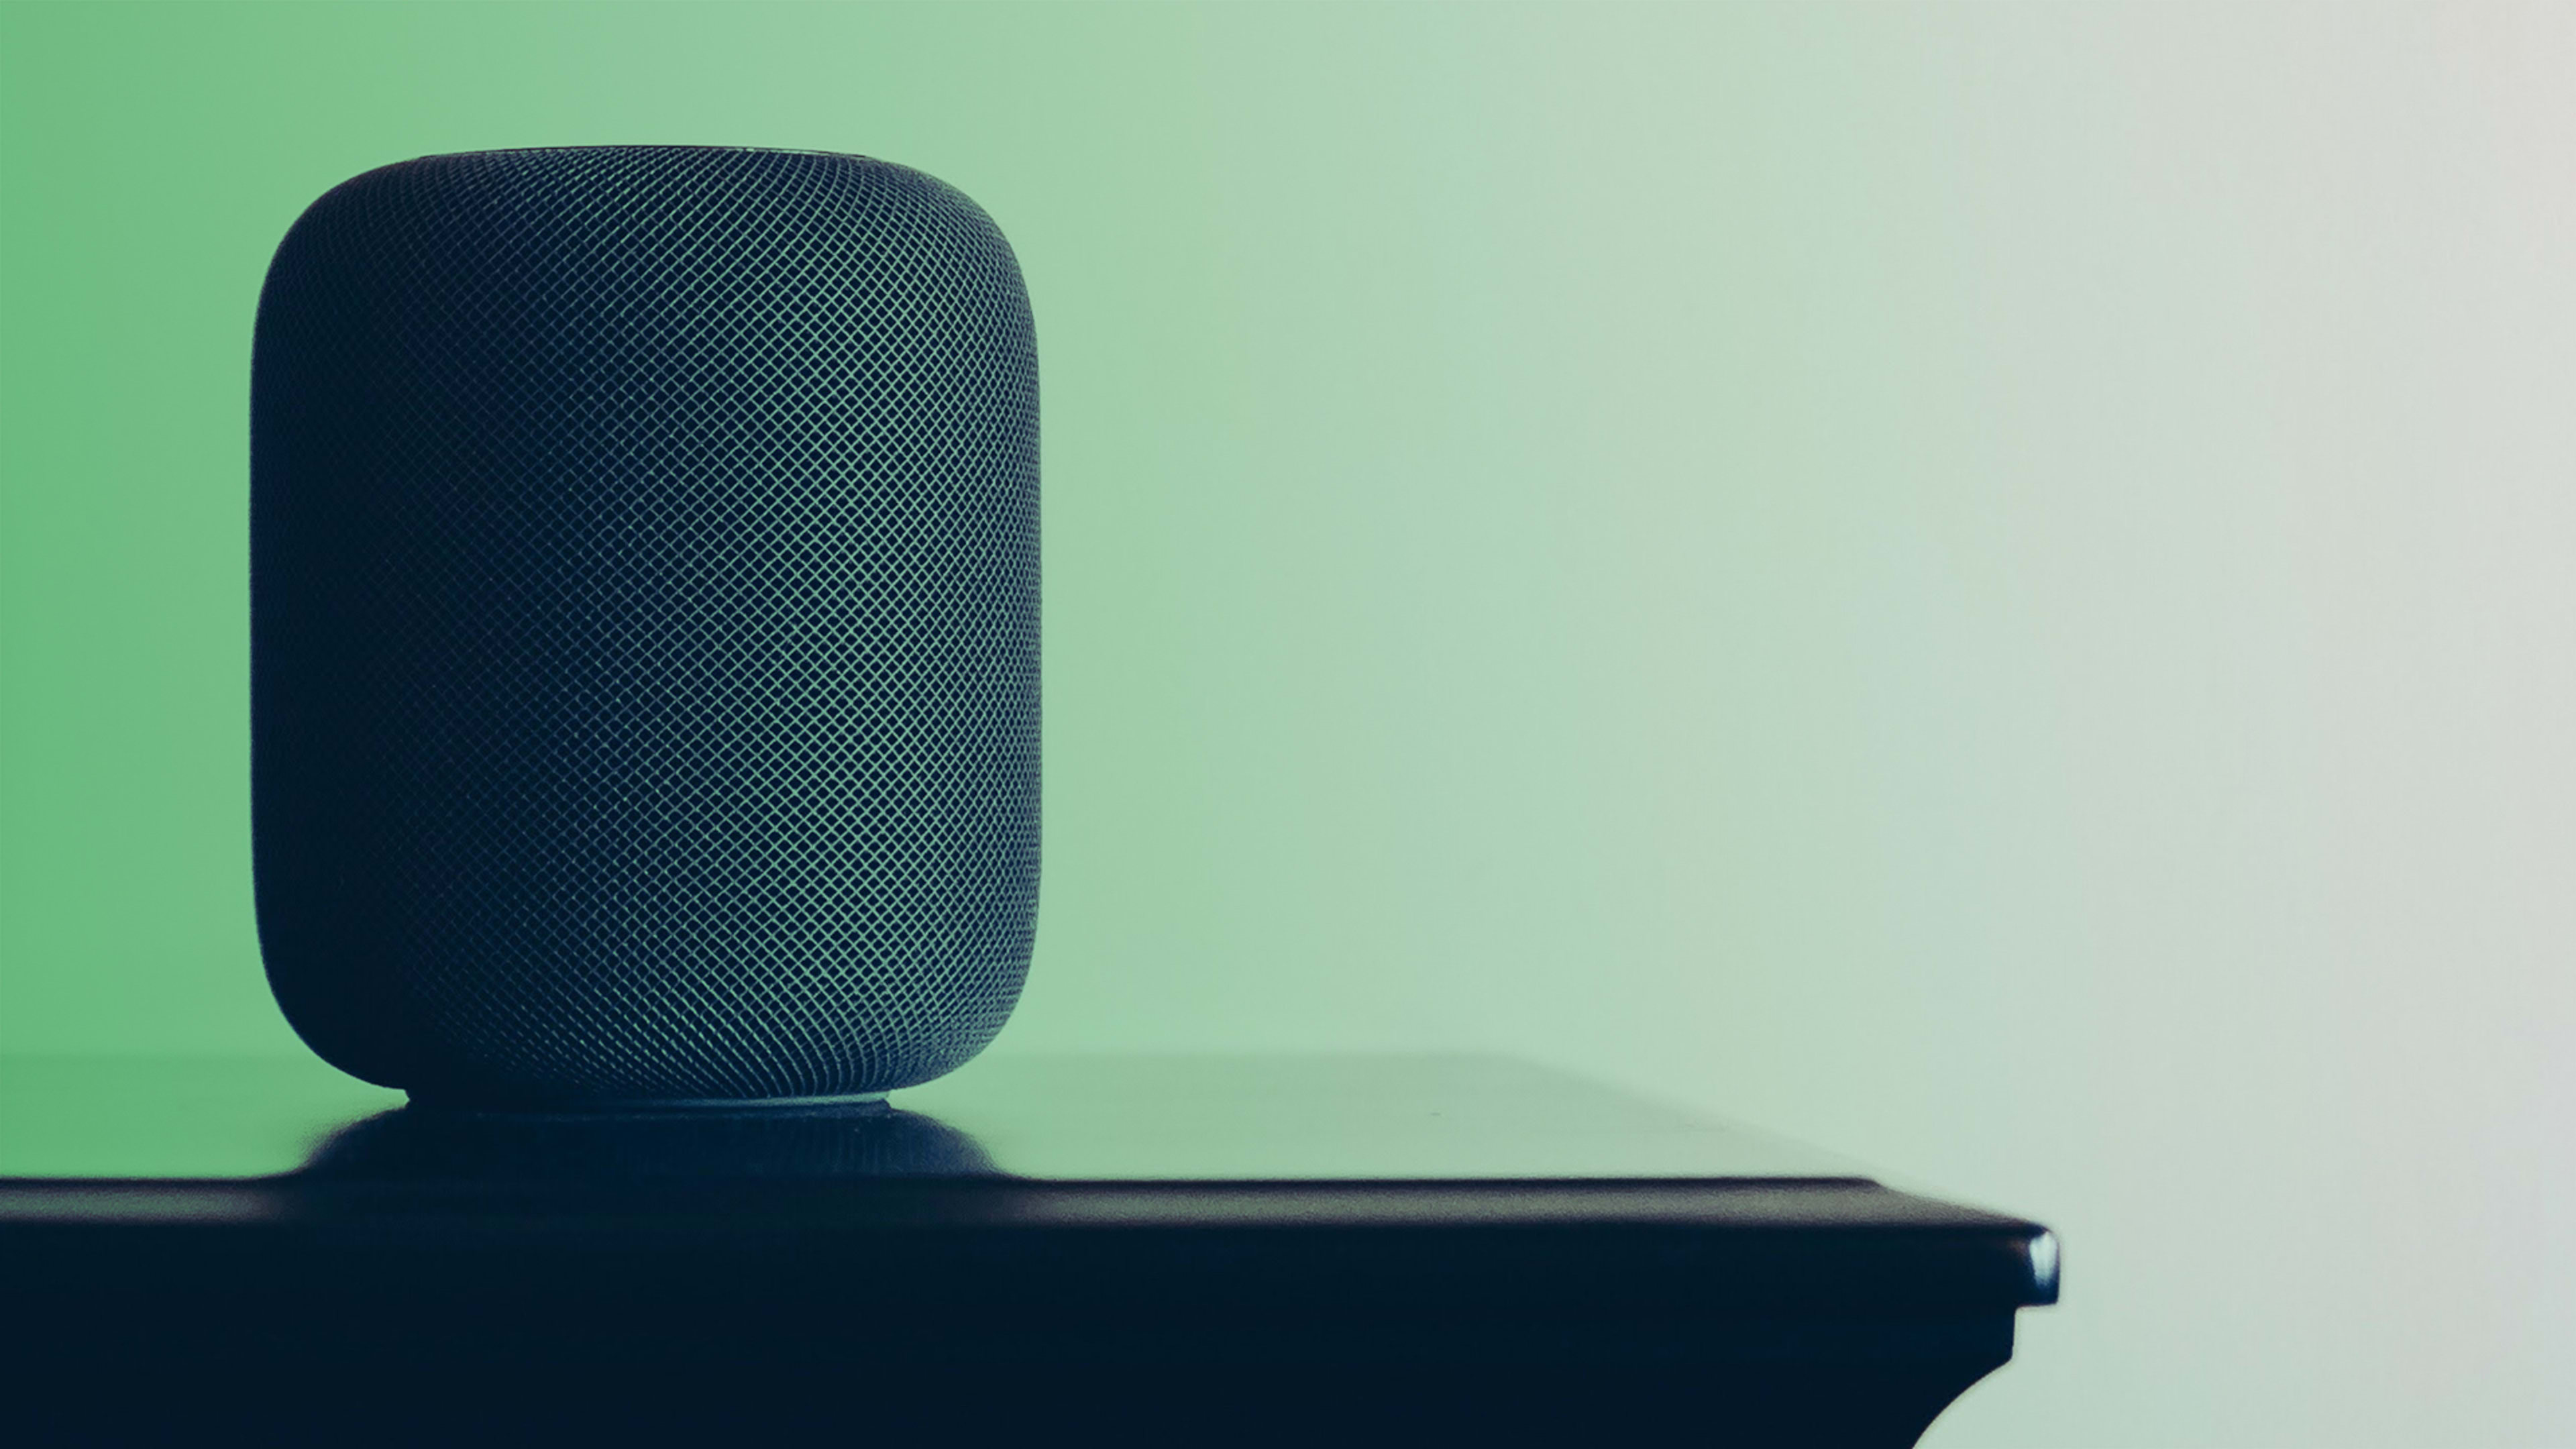 Apple HomePod prices drop as cheap smart speakers take off